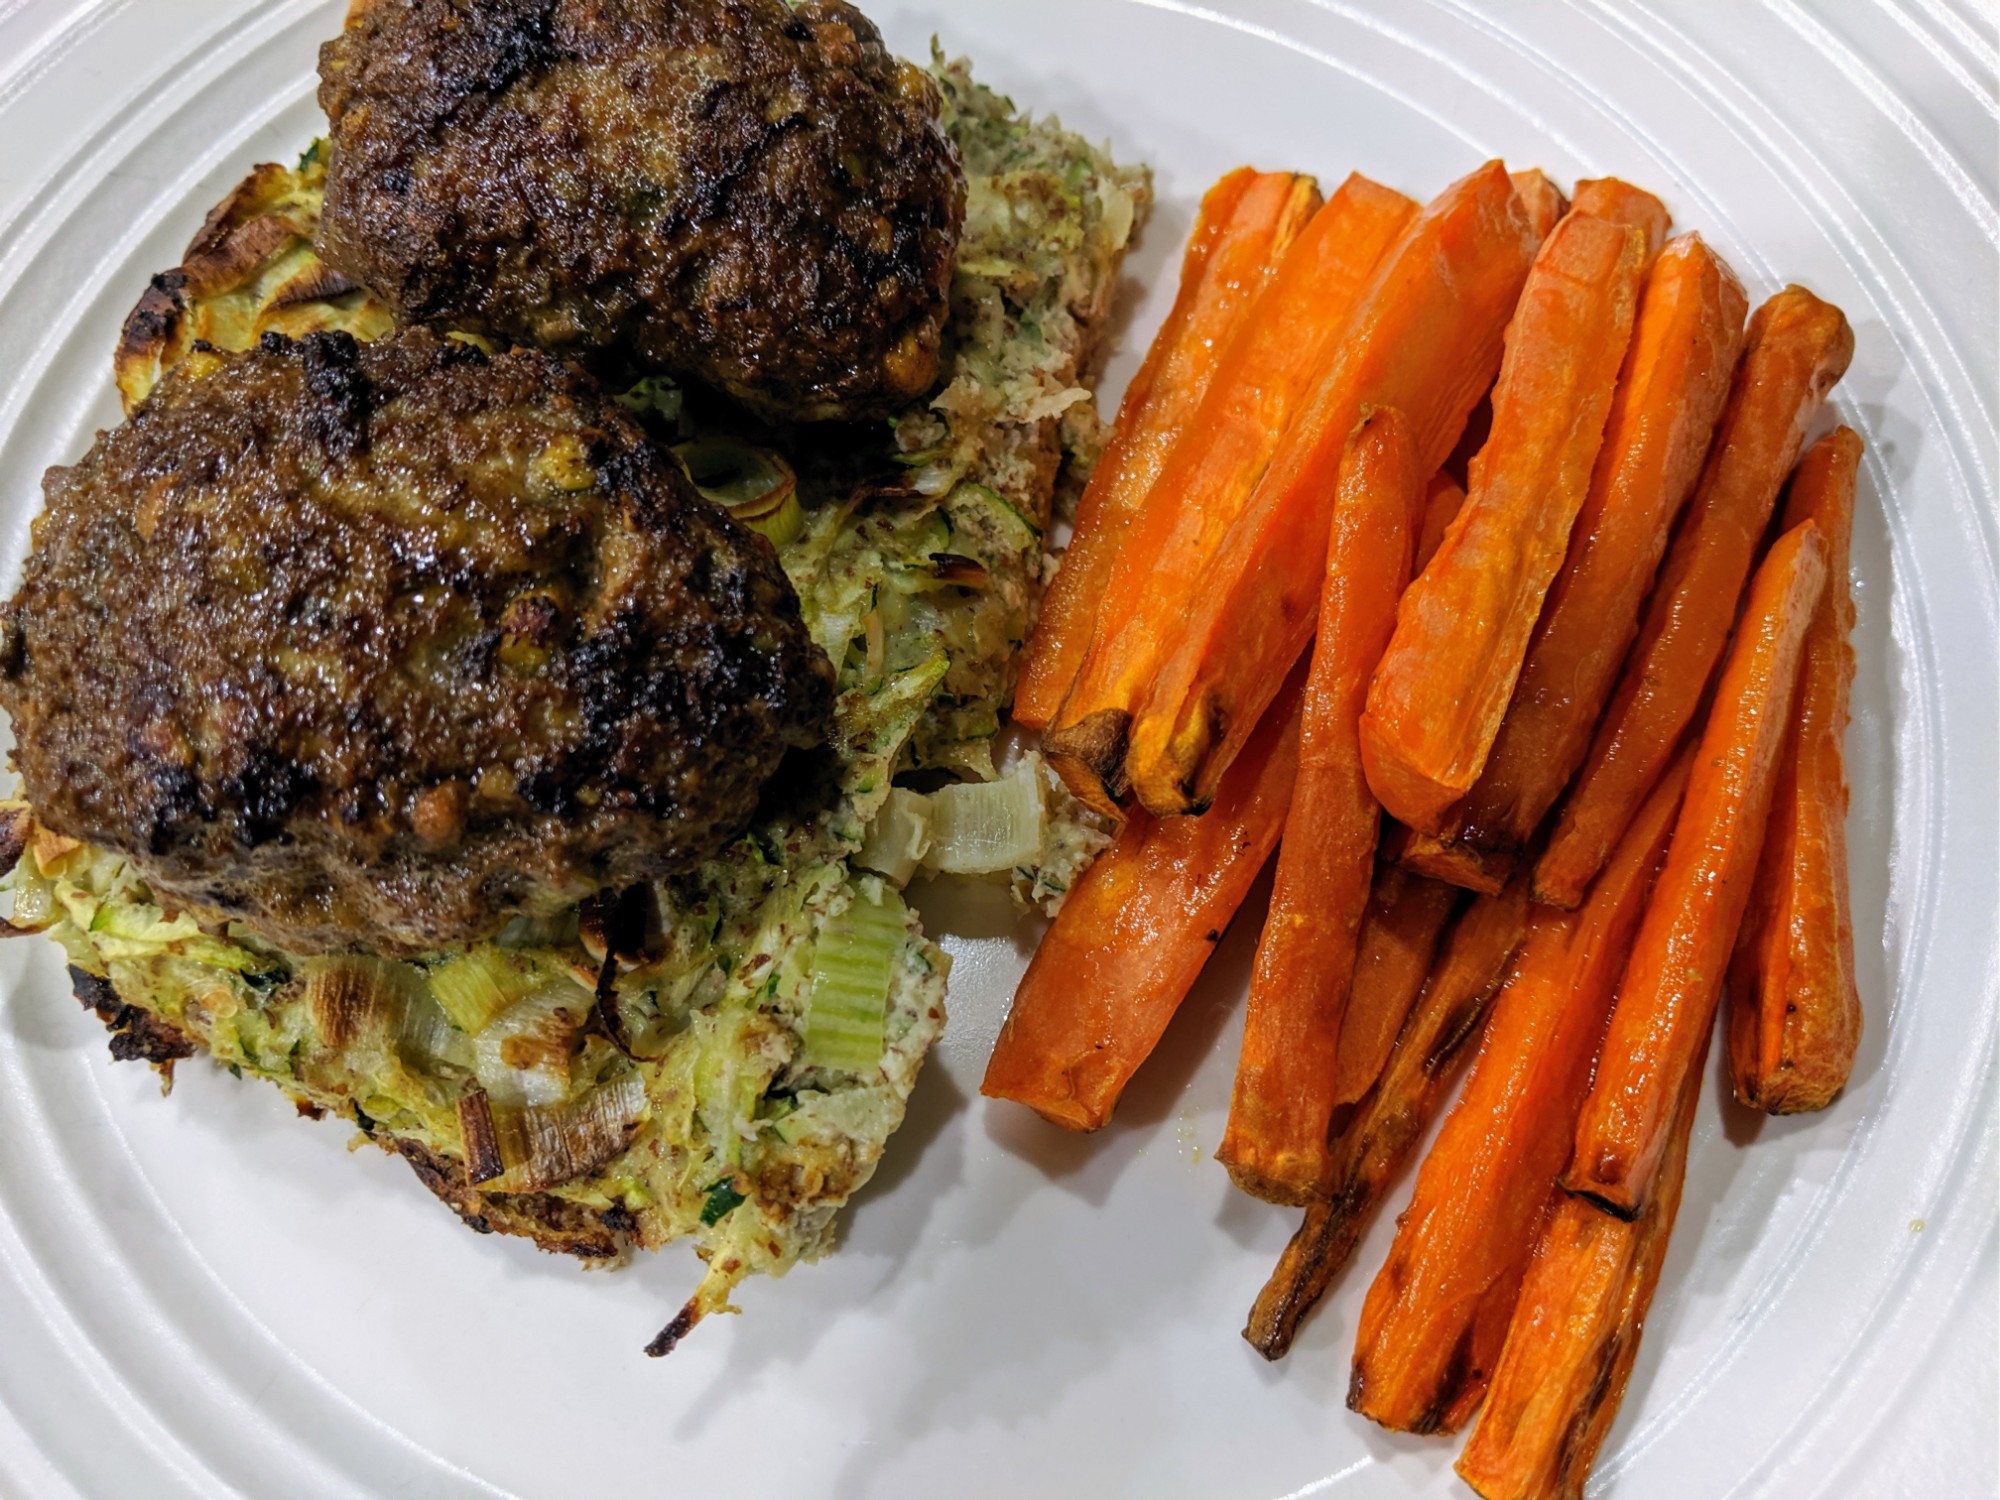 Moroccan Lamb Patties over Zucchini Bake with Carrot Fries